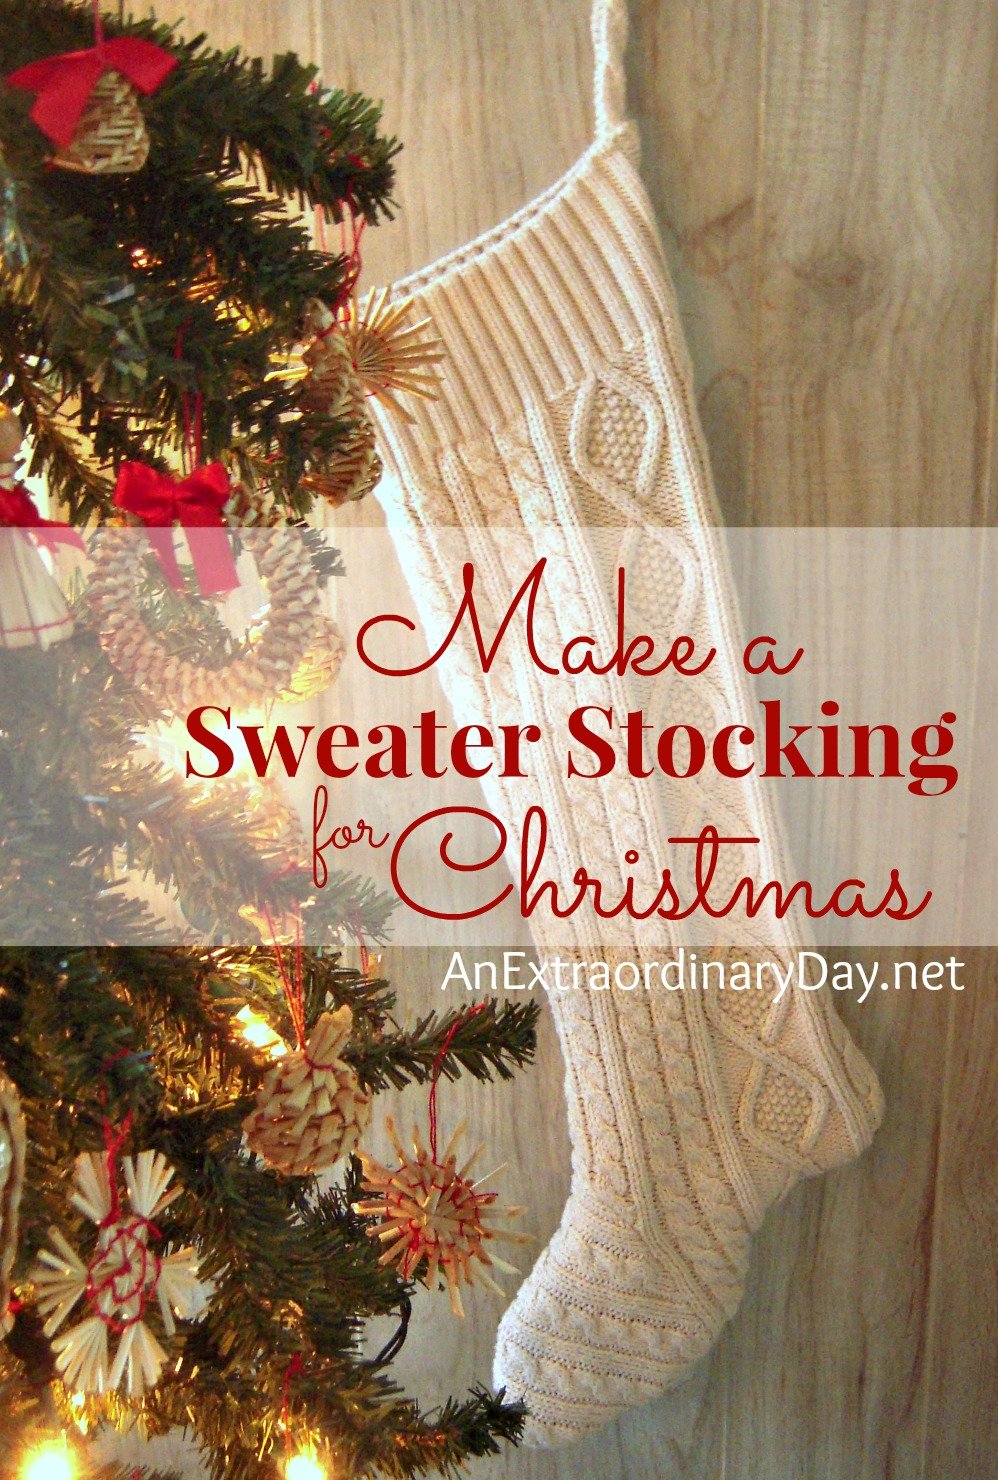 Make-a-Sweater-Stocking-for-Christmas-Recycle-AnExtraordinaryDay.net_